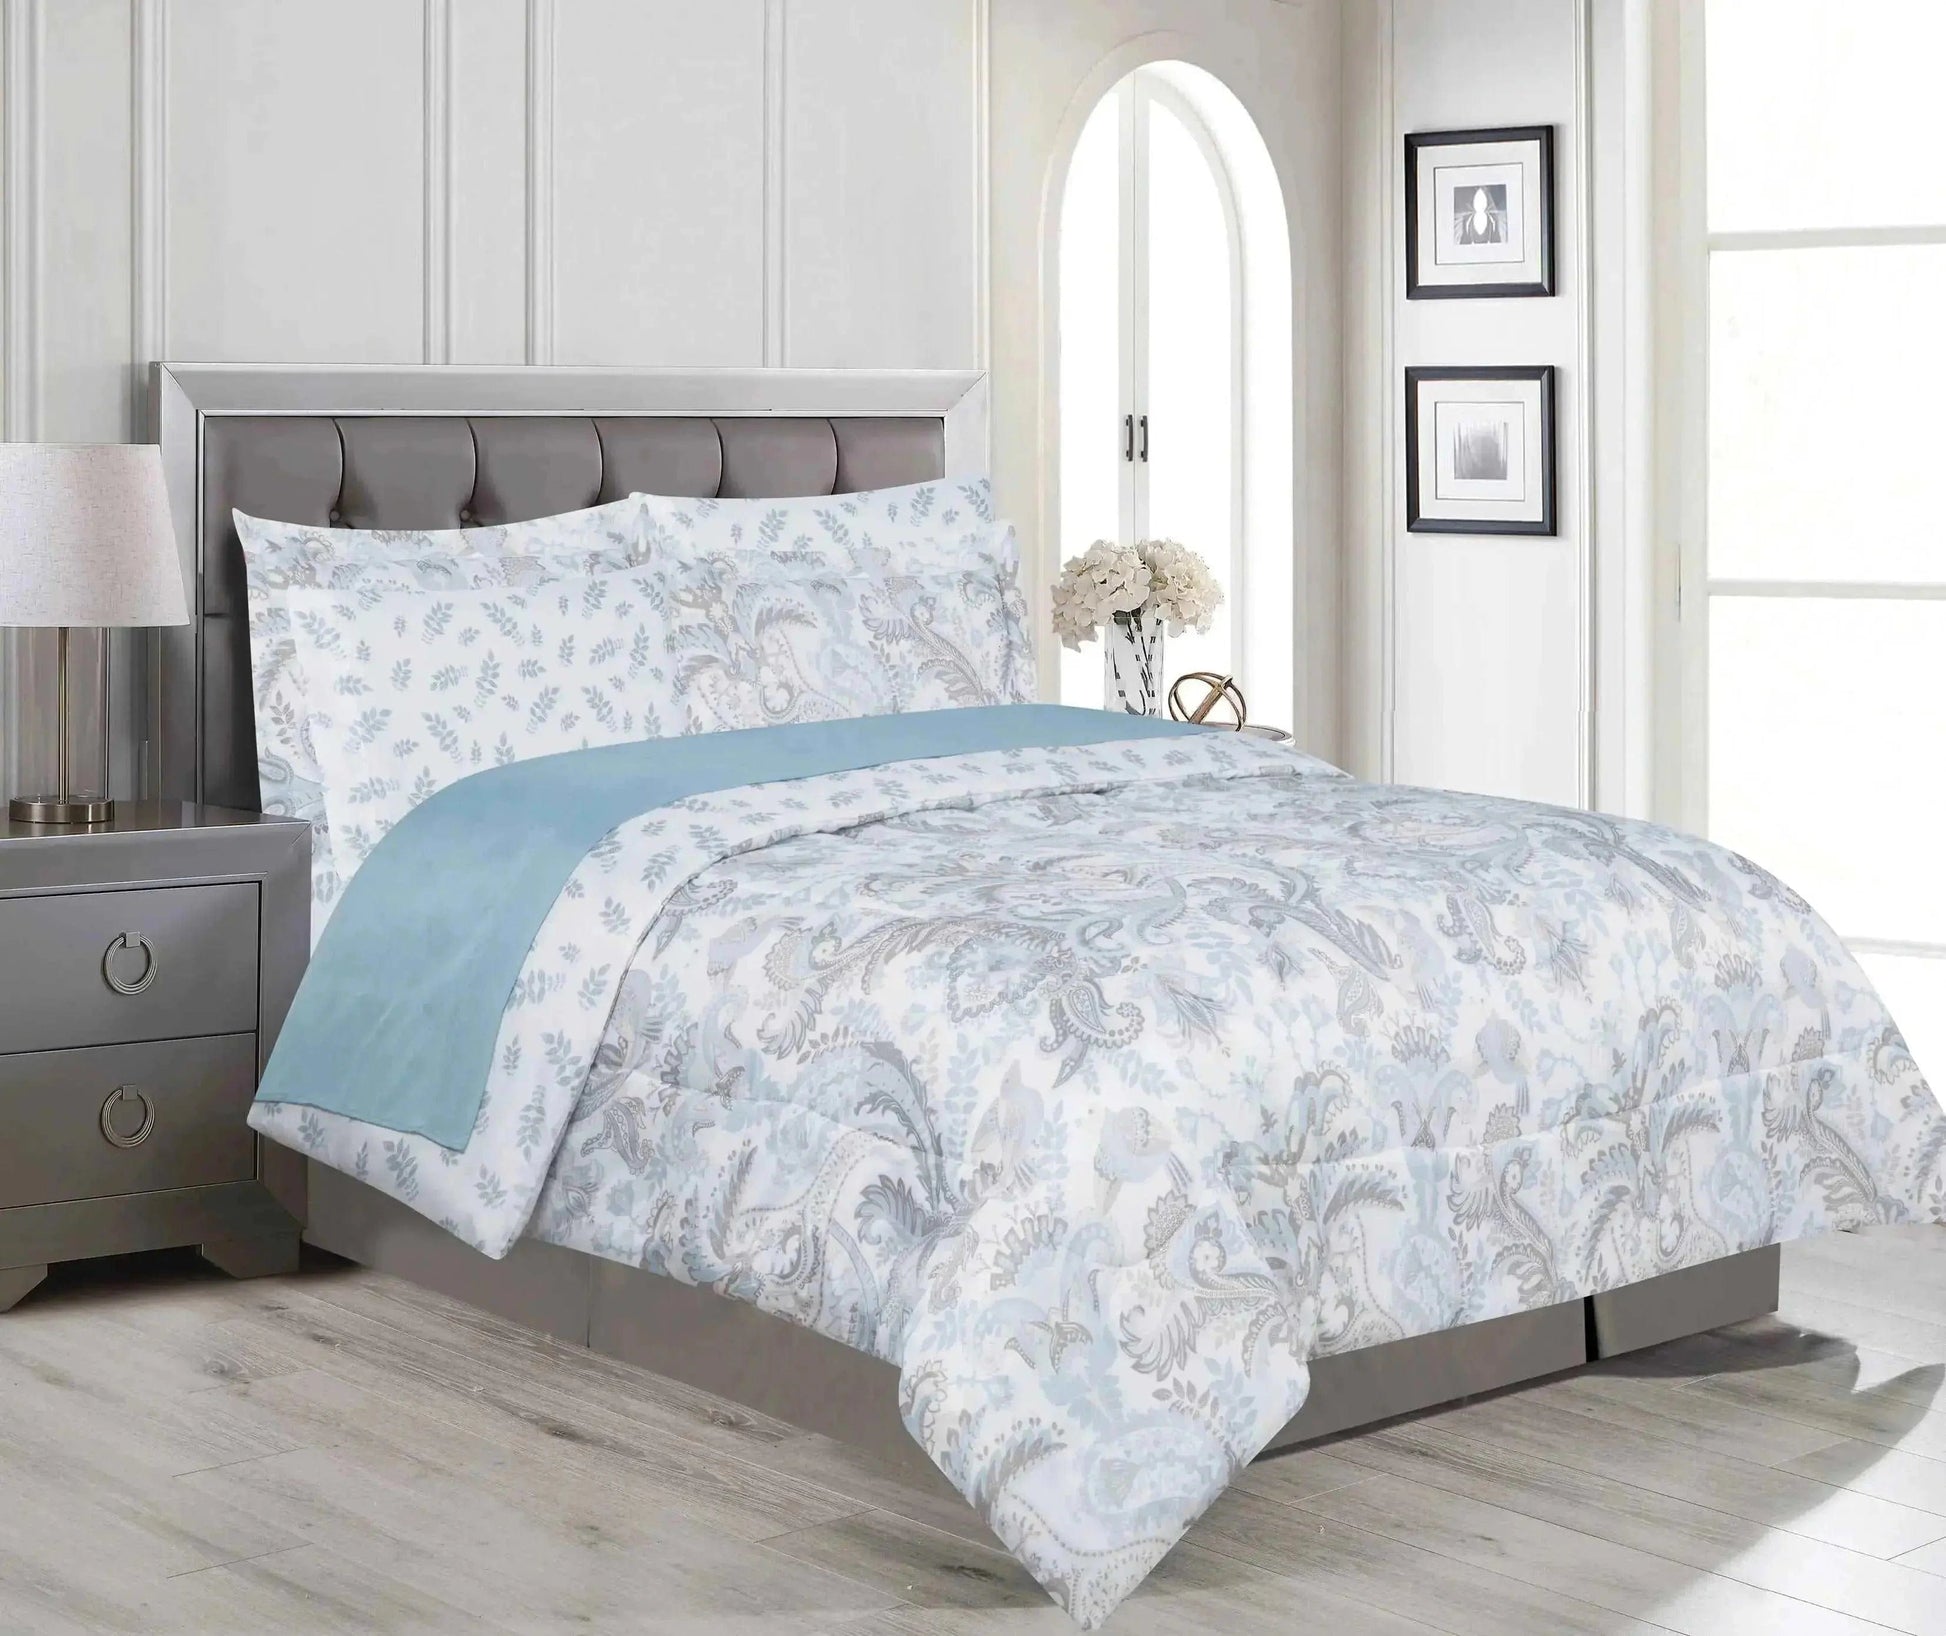 Linen World Comforter Set 7 Piece Bed in a Bag King or Queen Sized